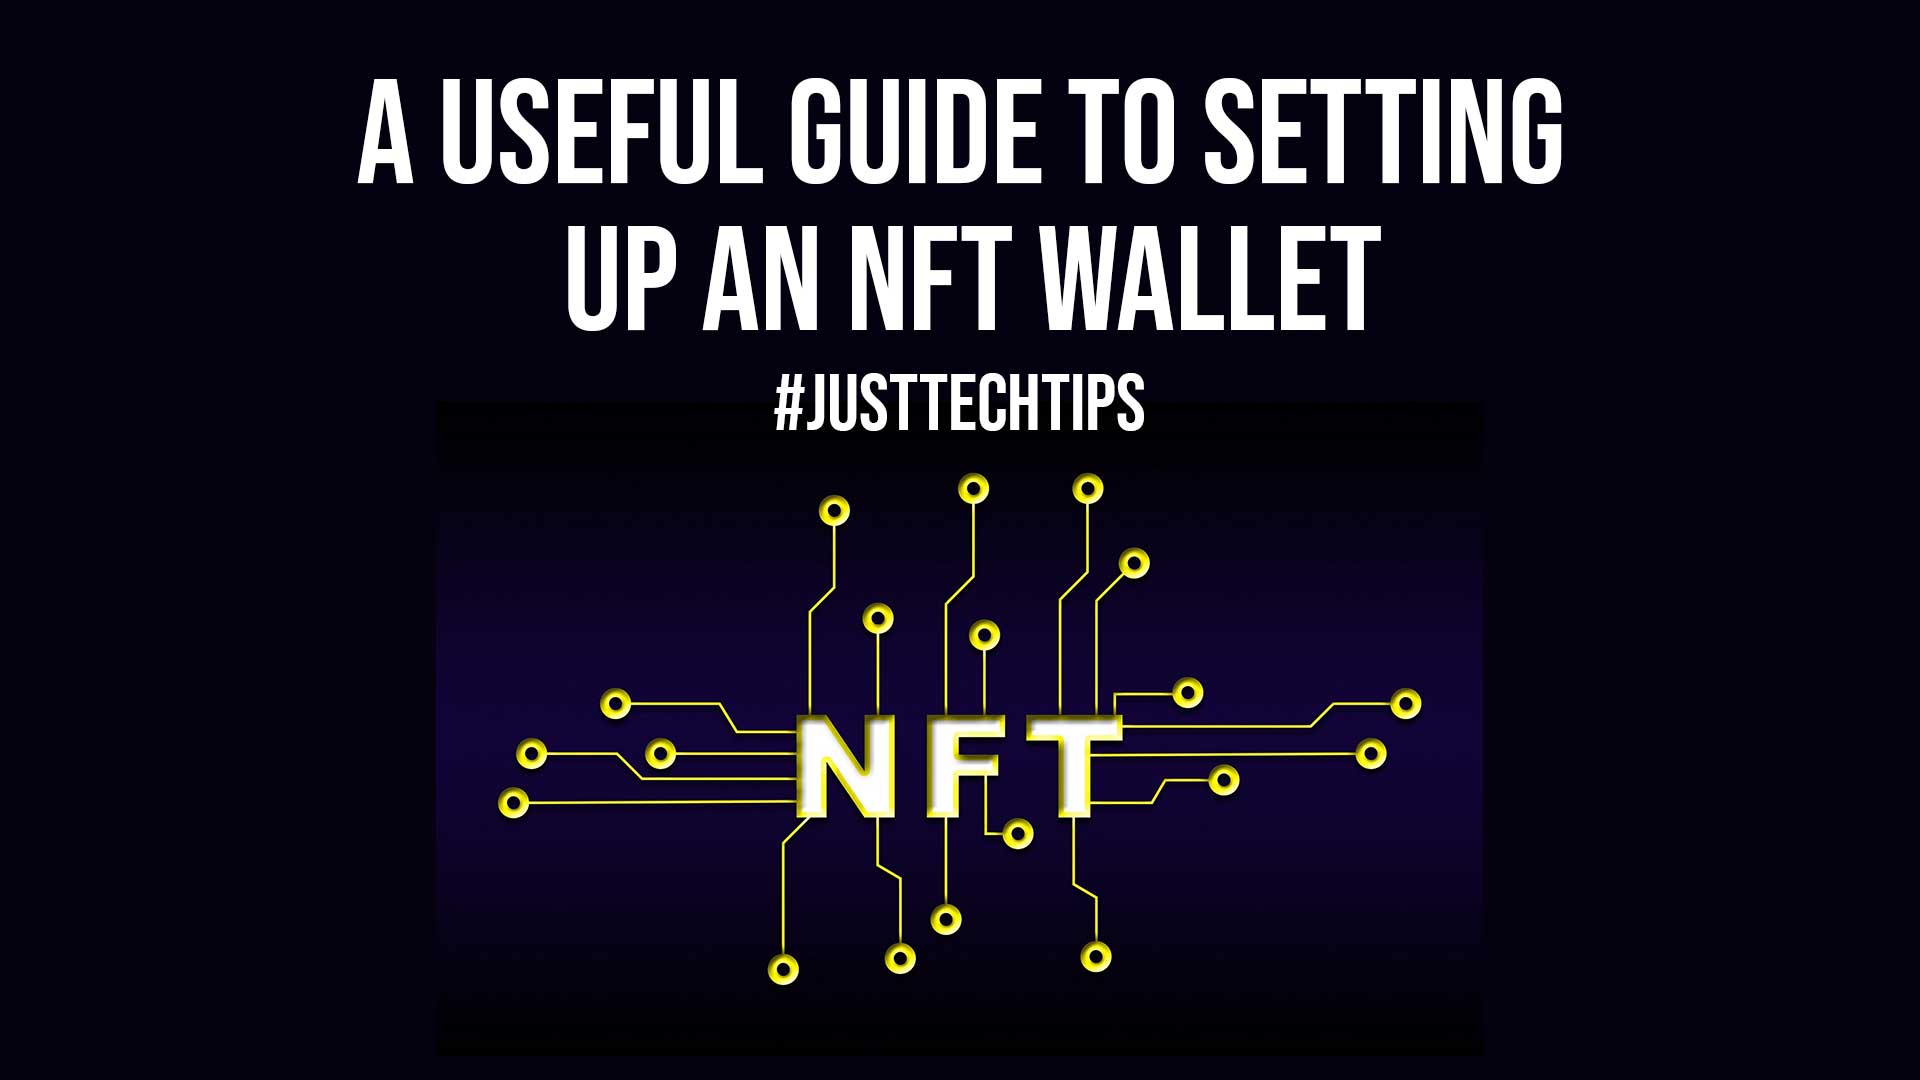 A Useful Guide To Setting Up An NFT Wallet